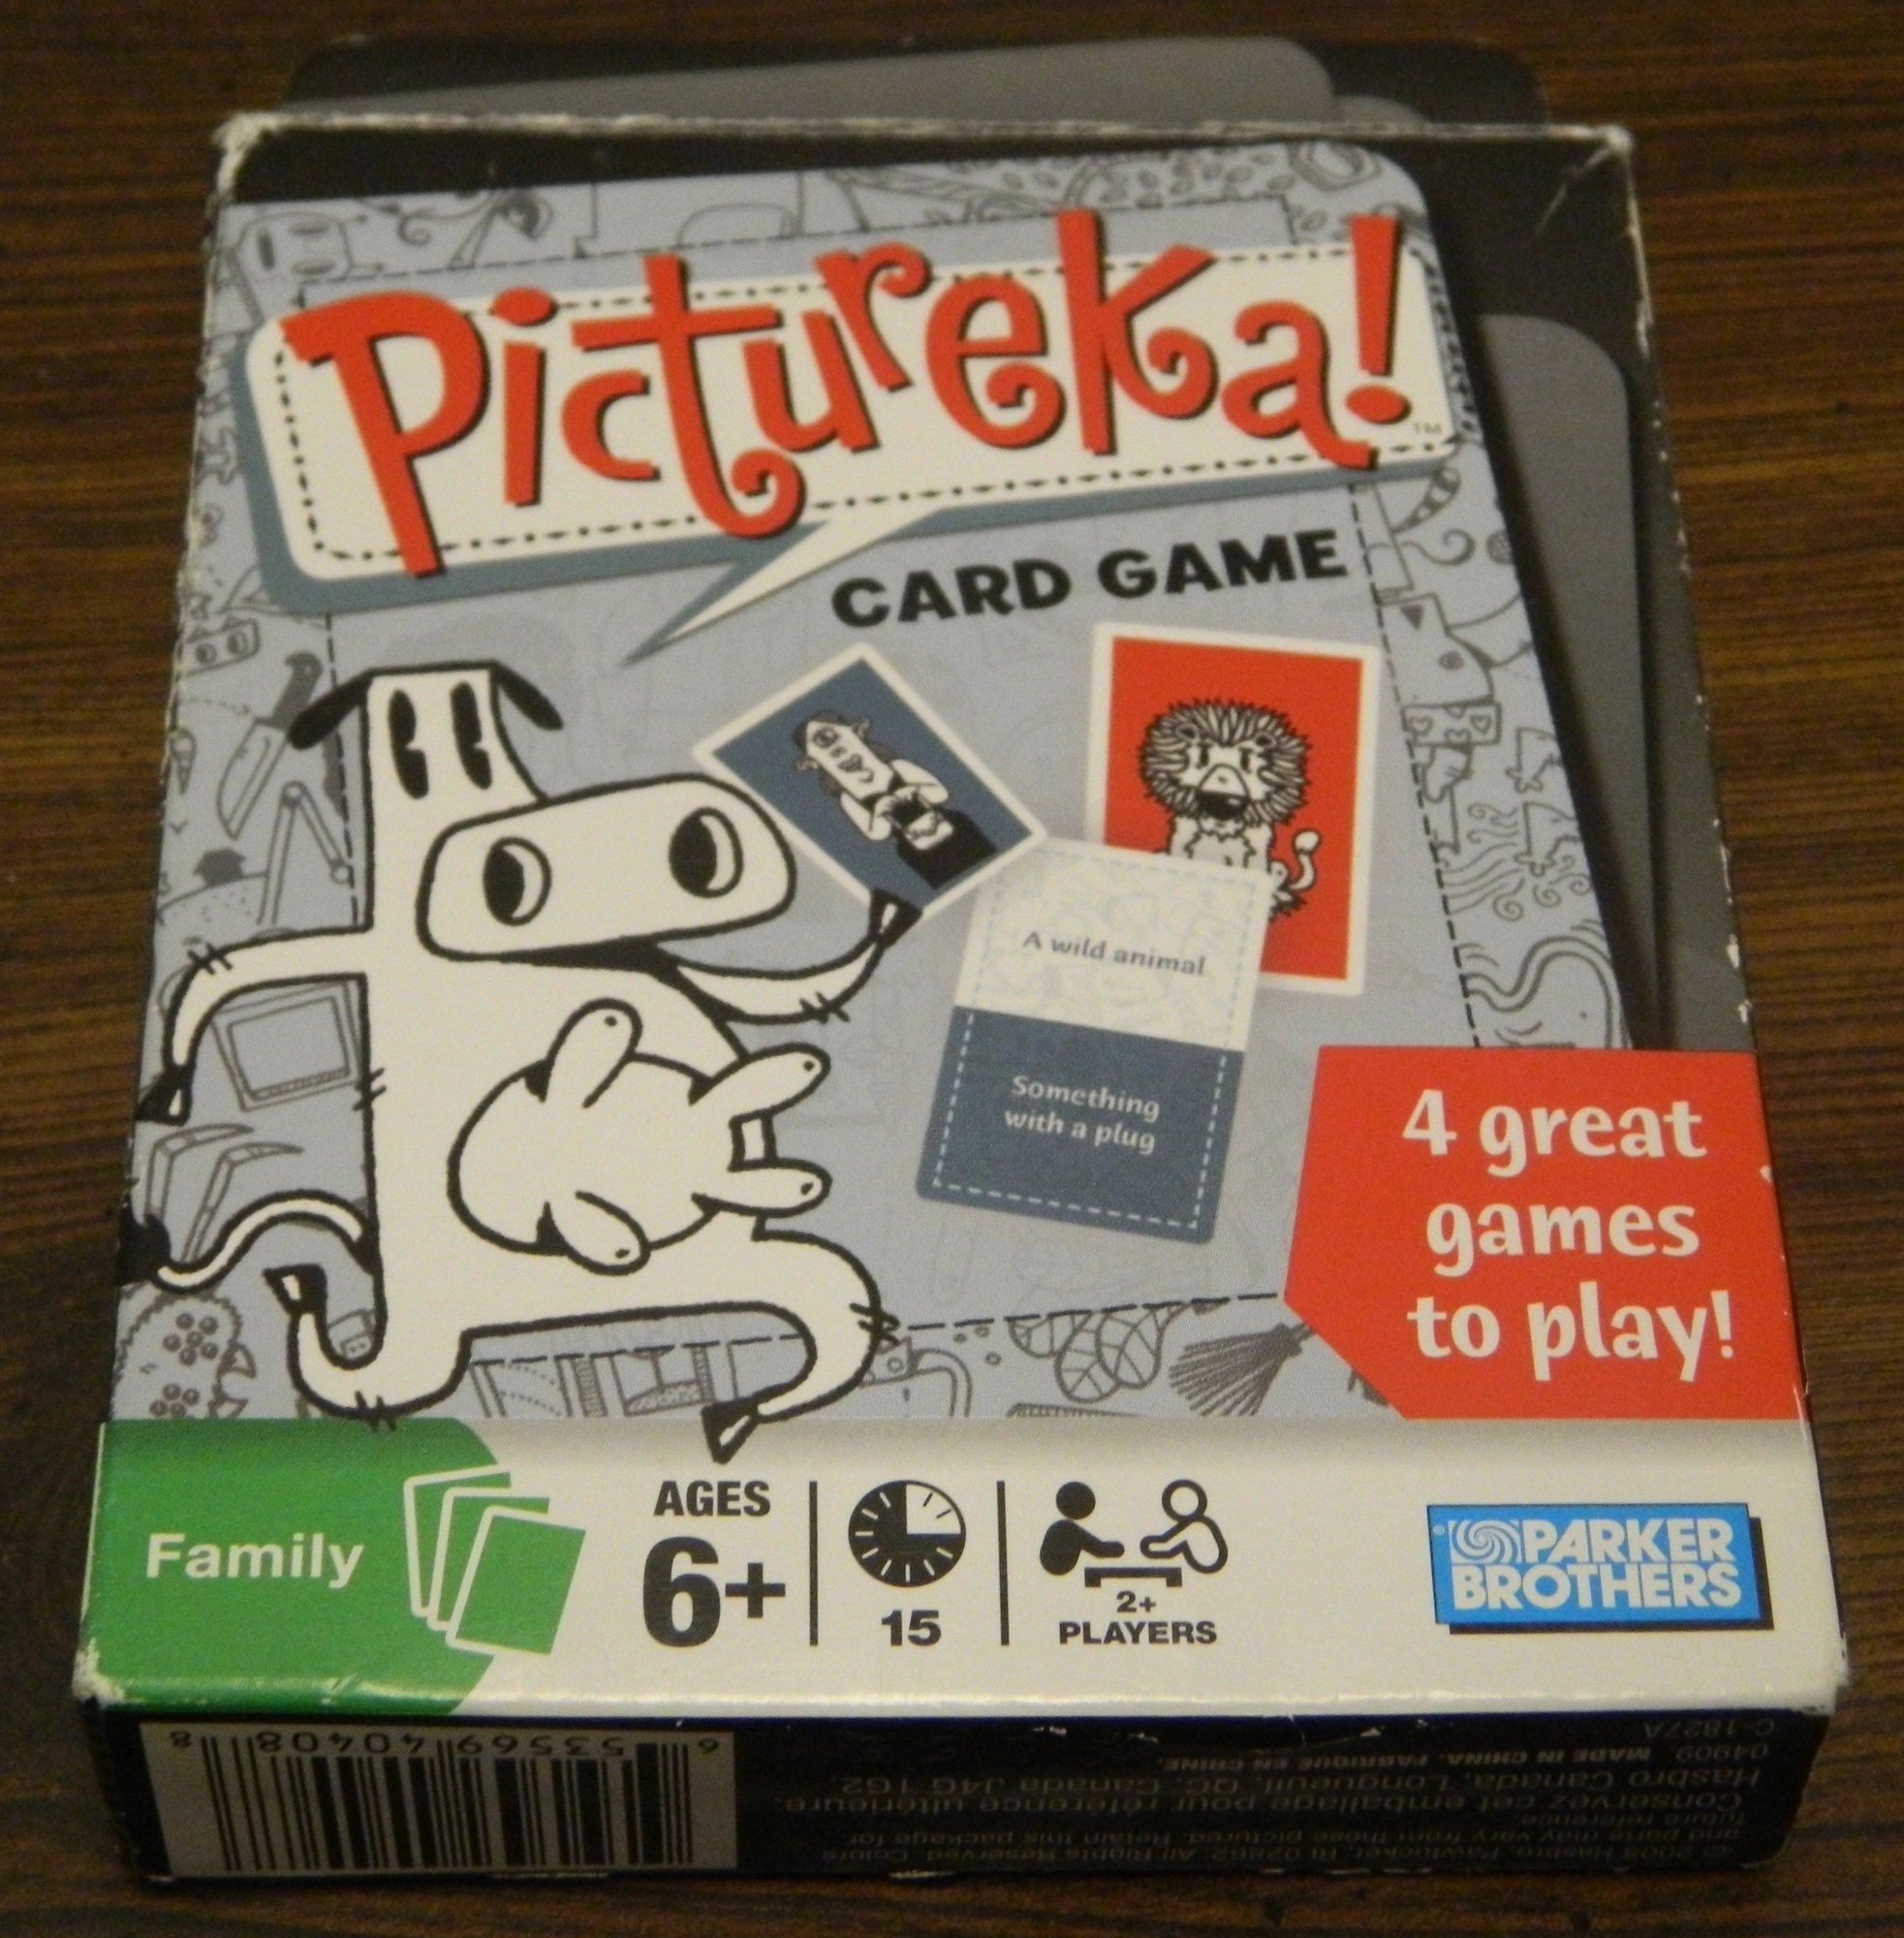 Pictureka! Card Game Review and Rules